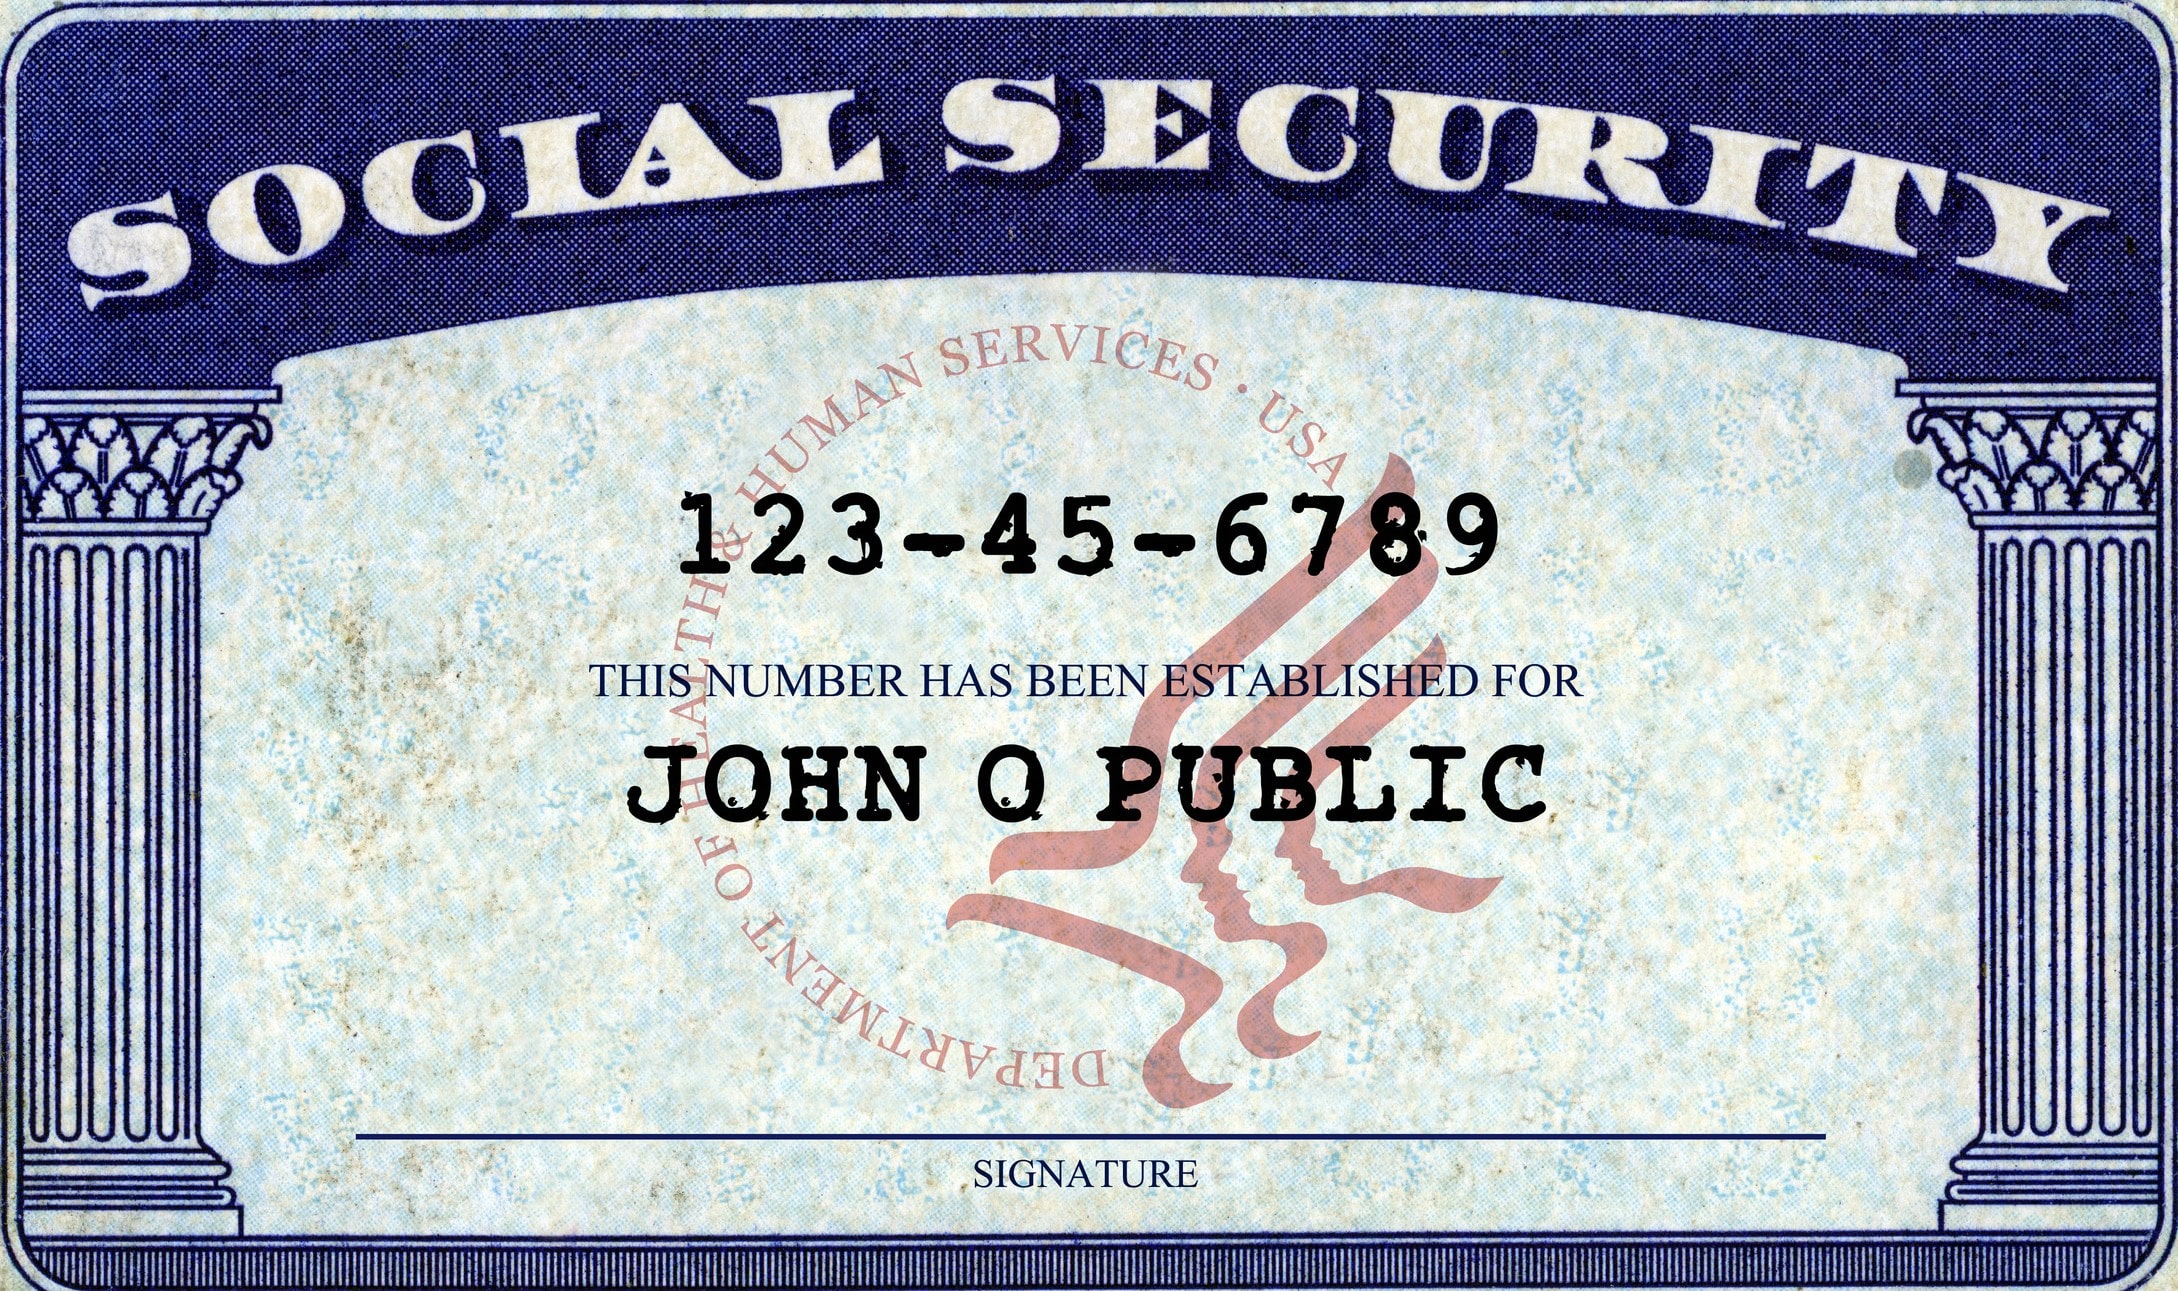 Fight for Social Security Rights As Proof of U.S. Citizenship by a 60-Year-Old Florida Man